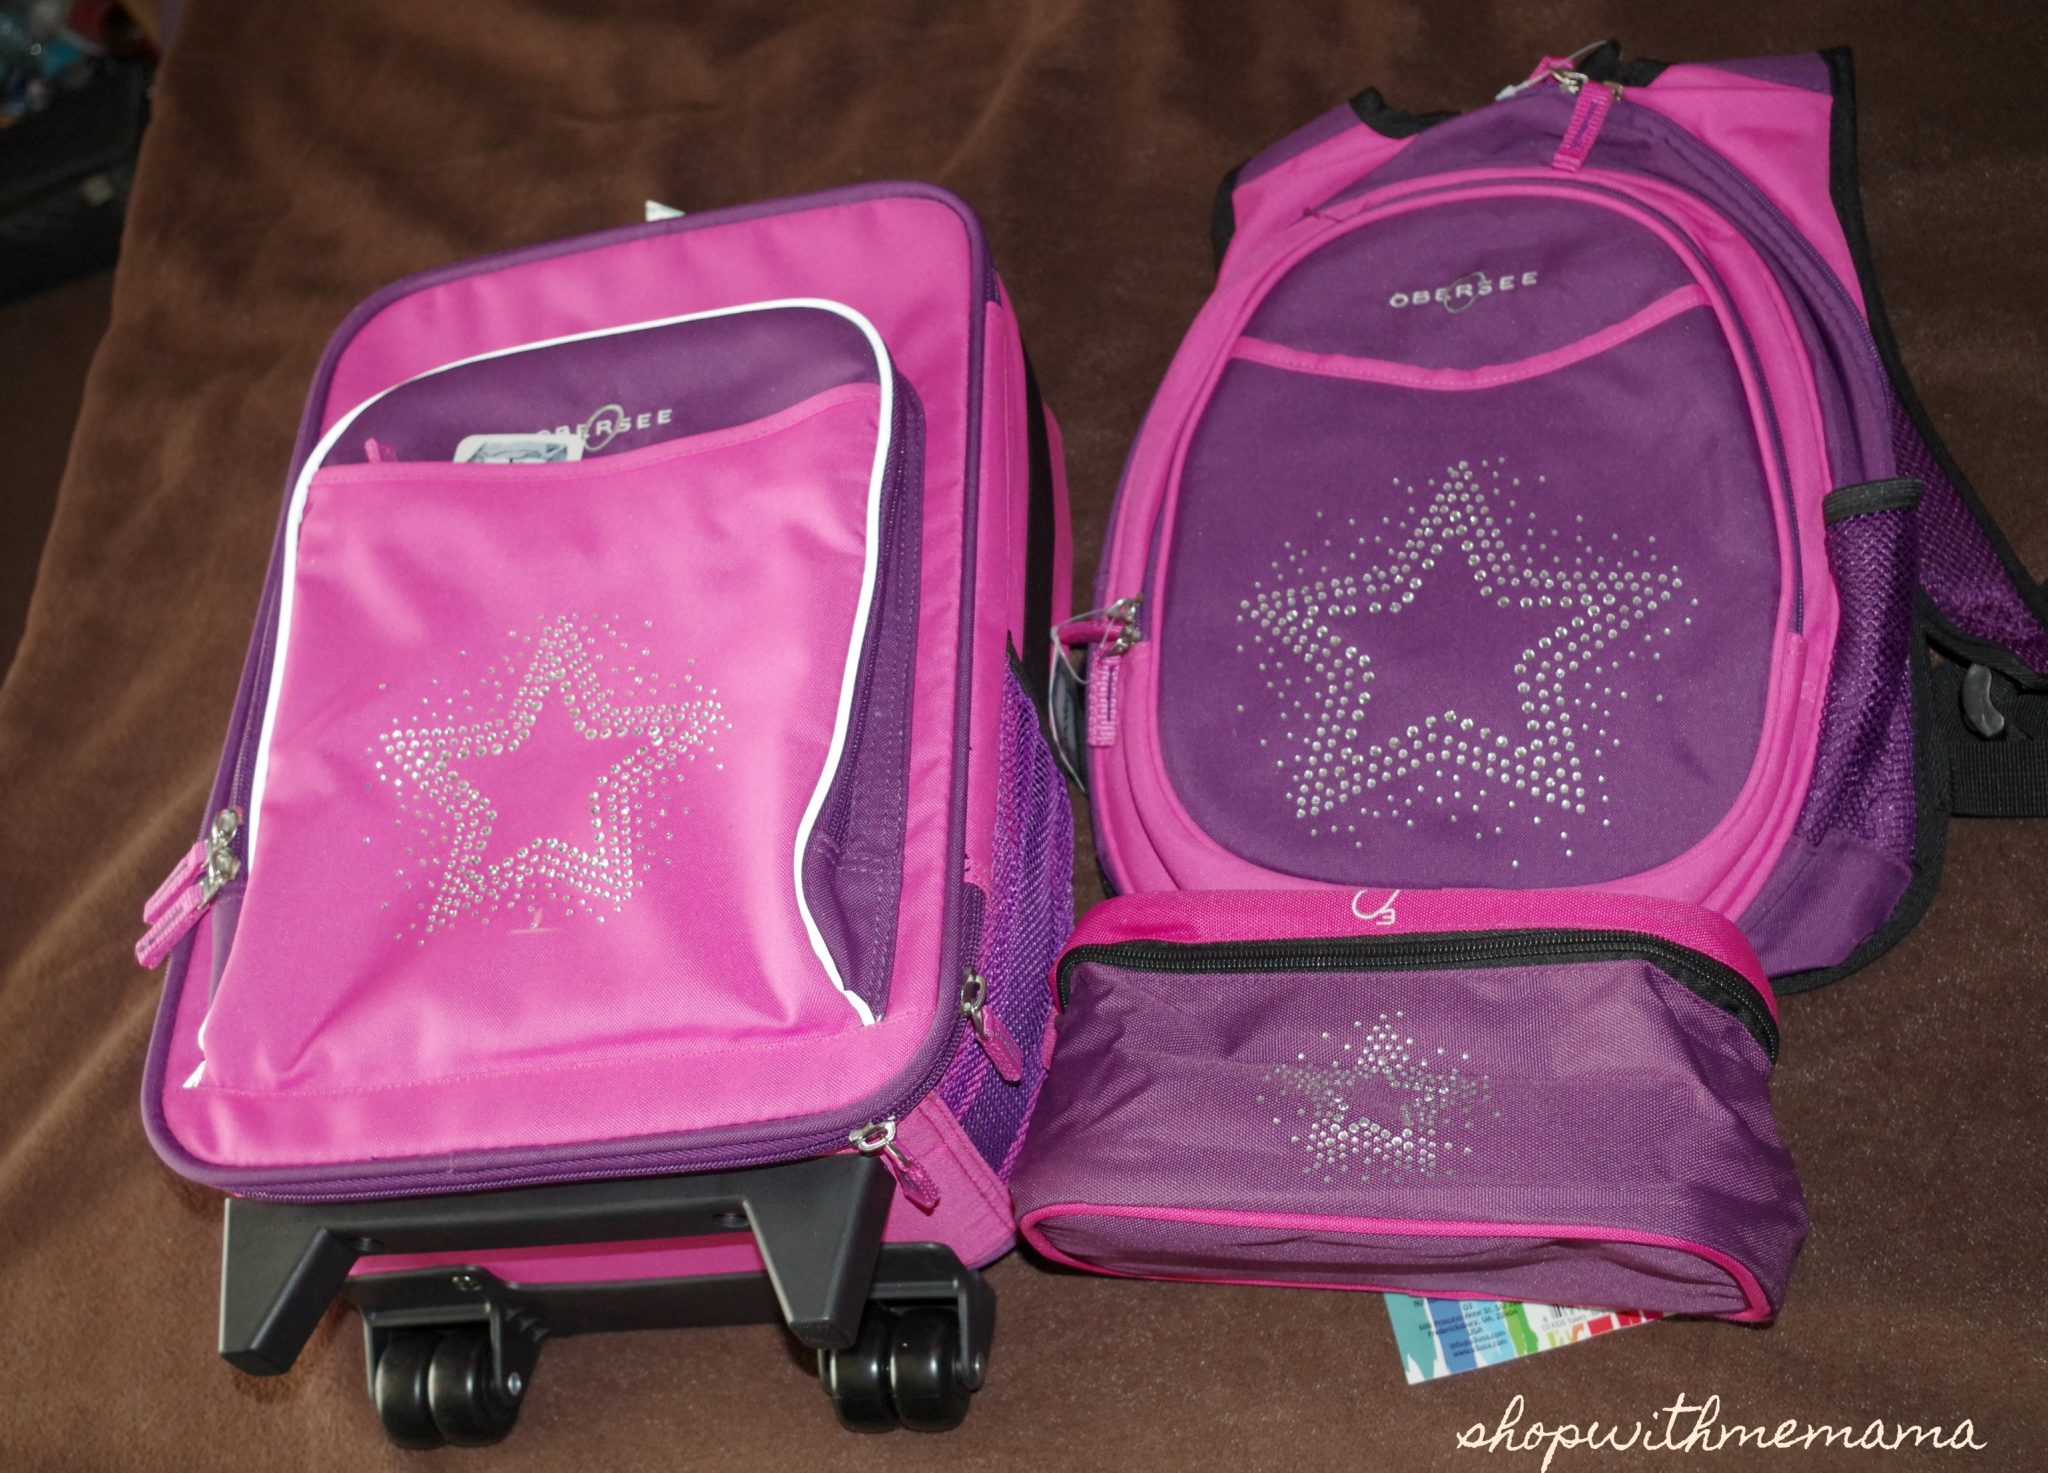 Obersee Kids Luggage Makes Traveling With Kids Fun!